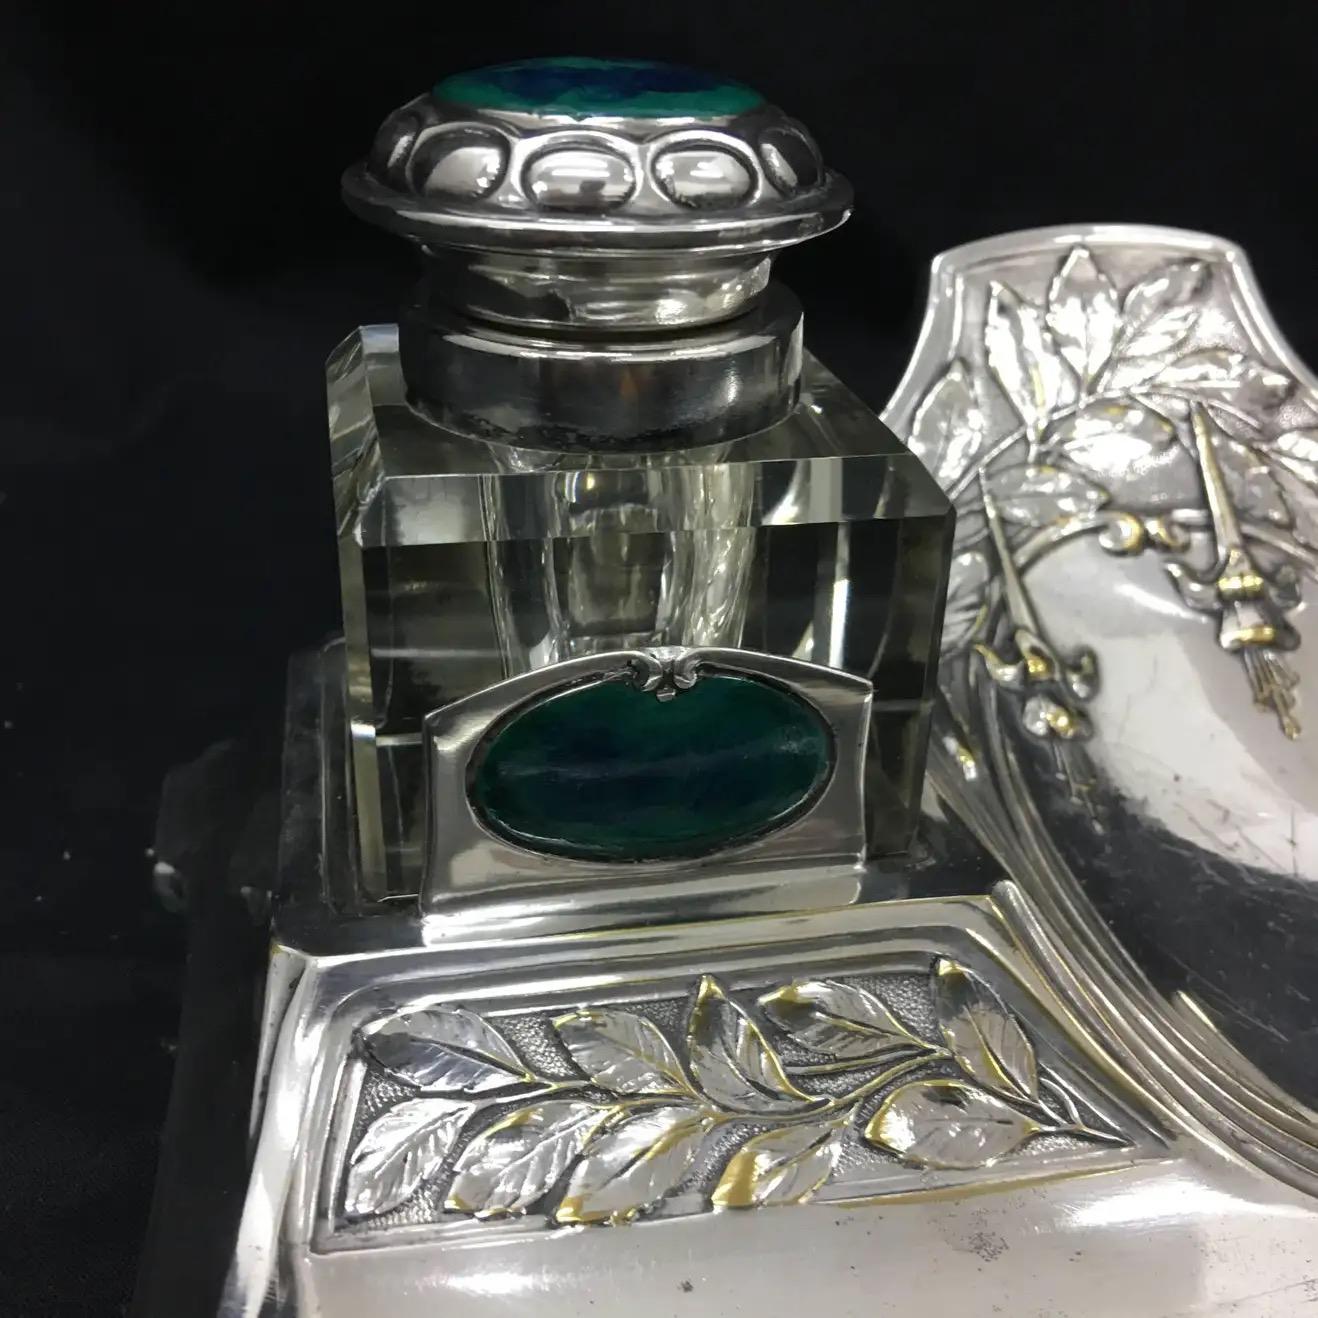 1900, High Quality Art Nouveau Silver Plated and Enamels German Inkwell For Sale 3